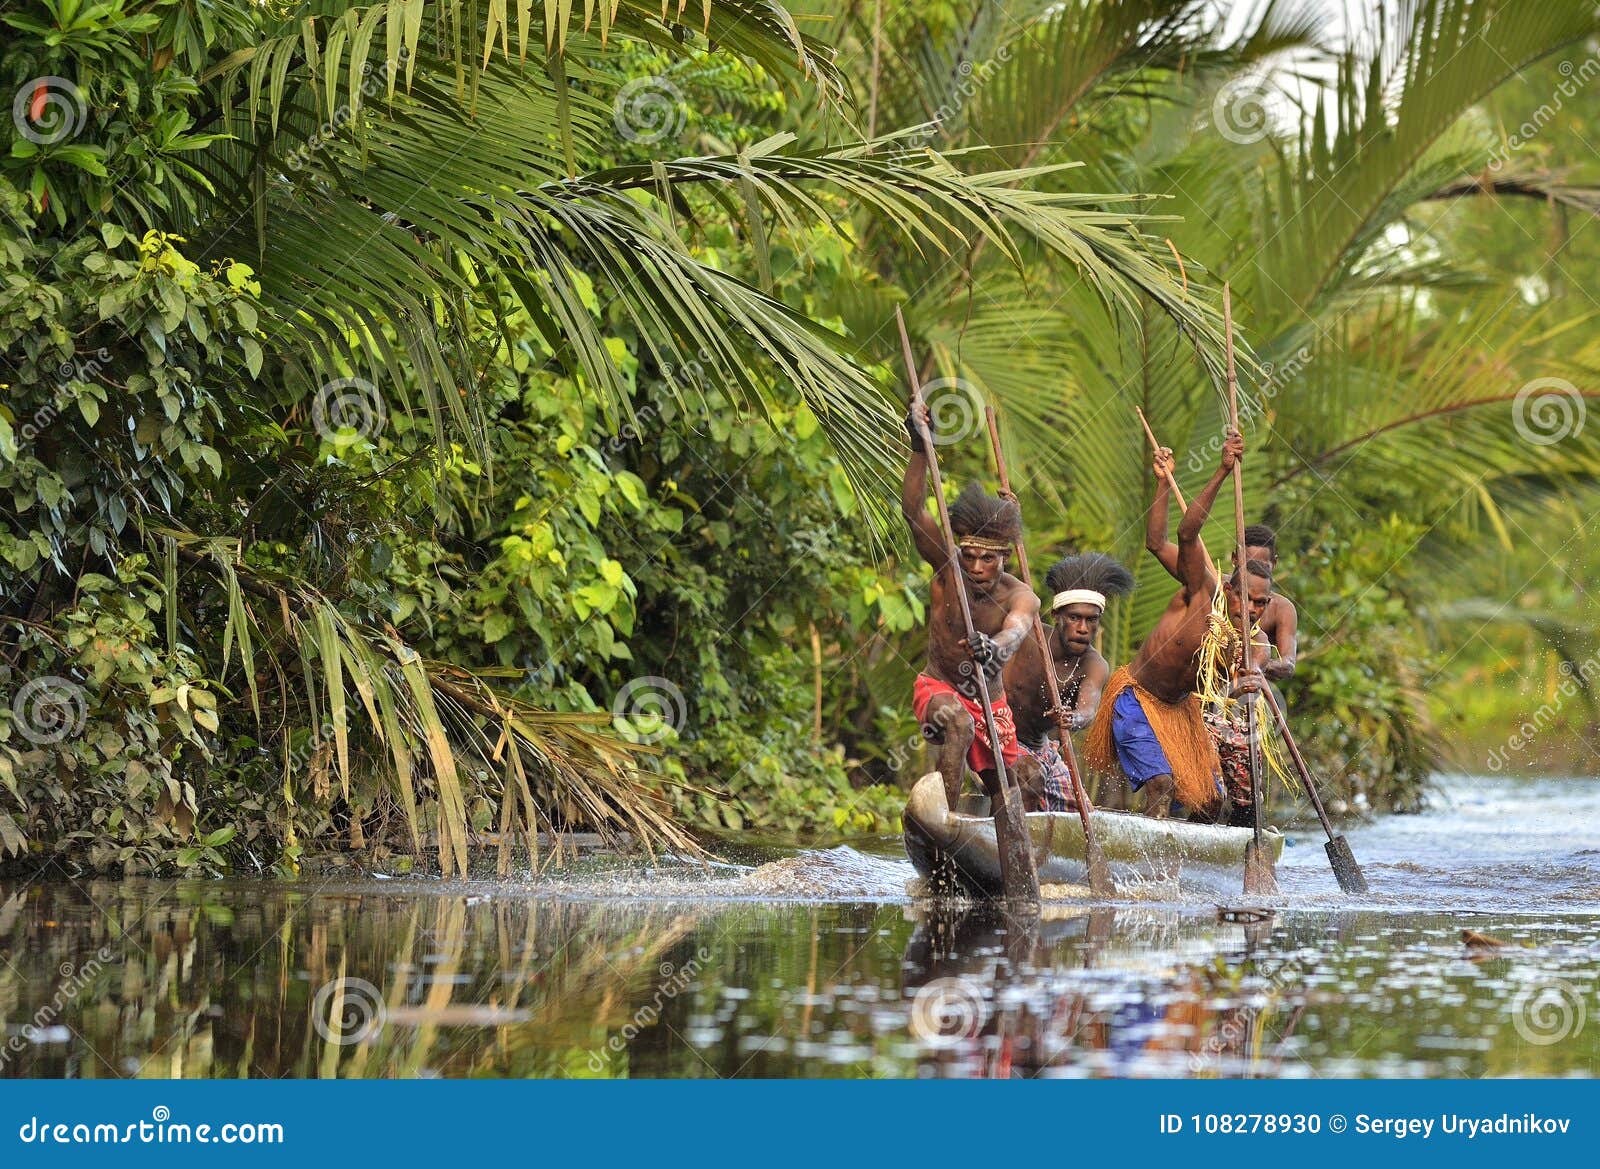 Canoe War Ceremony Of Asmat People. Headhunters Of A Tribe Of Asmat. Editorial Image - Image of ...